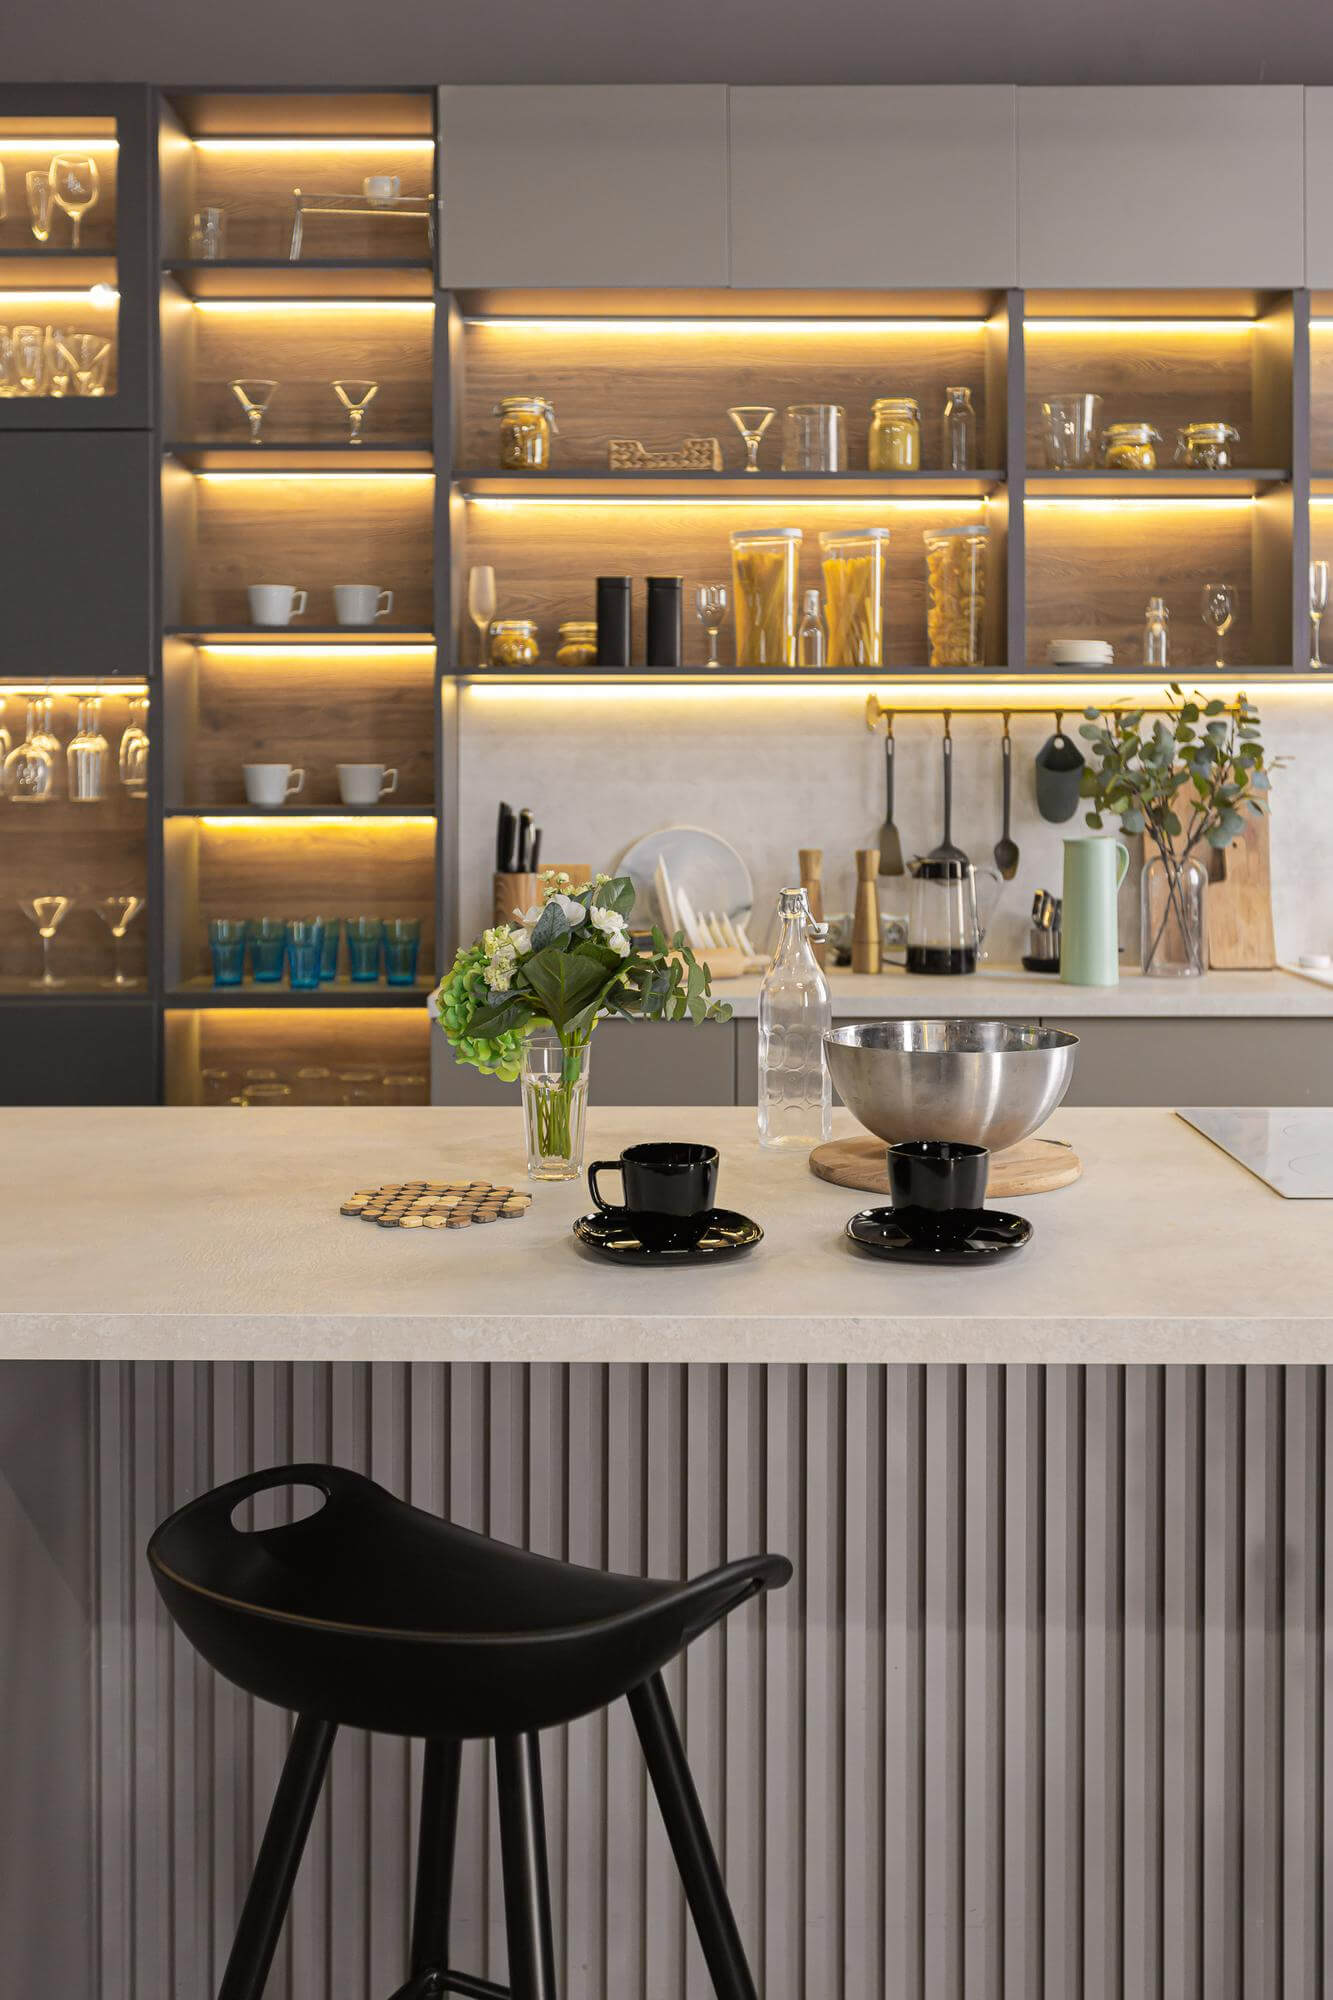 stylish-luxury-kitchen-interior-ultra-modern-spacious-apartment-dark-colors-with-super-cool-led-lighting-island-cooking (2)